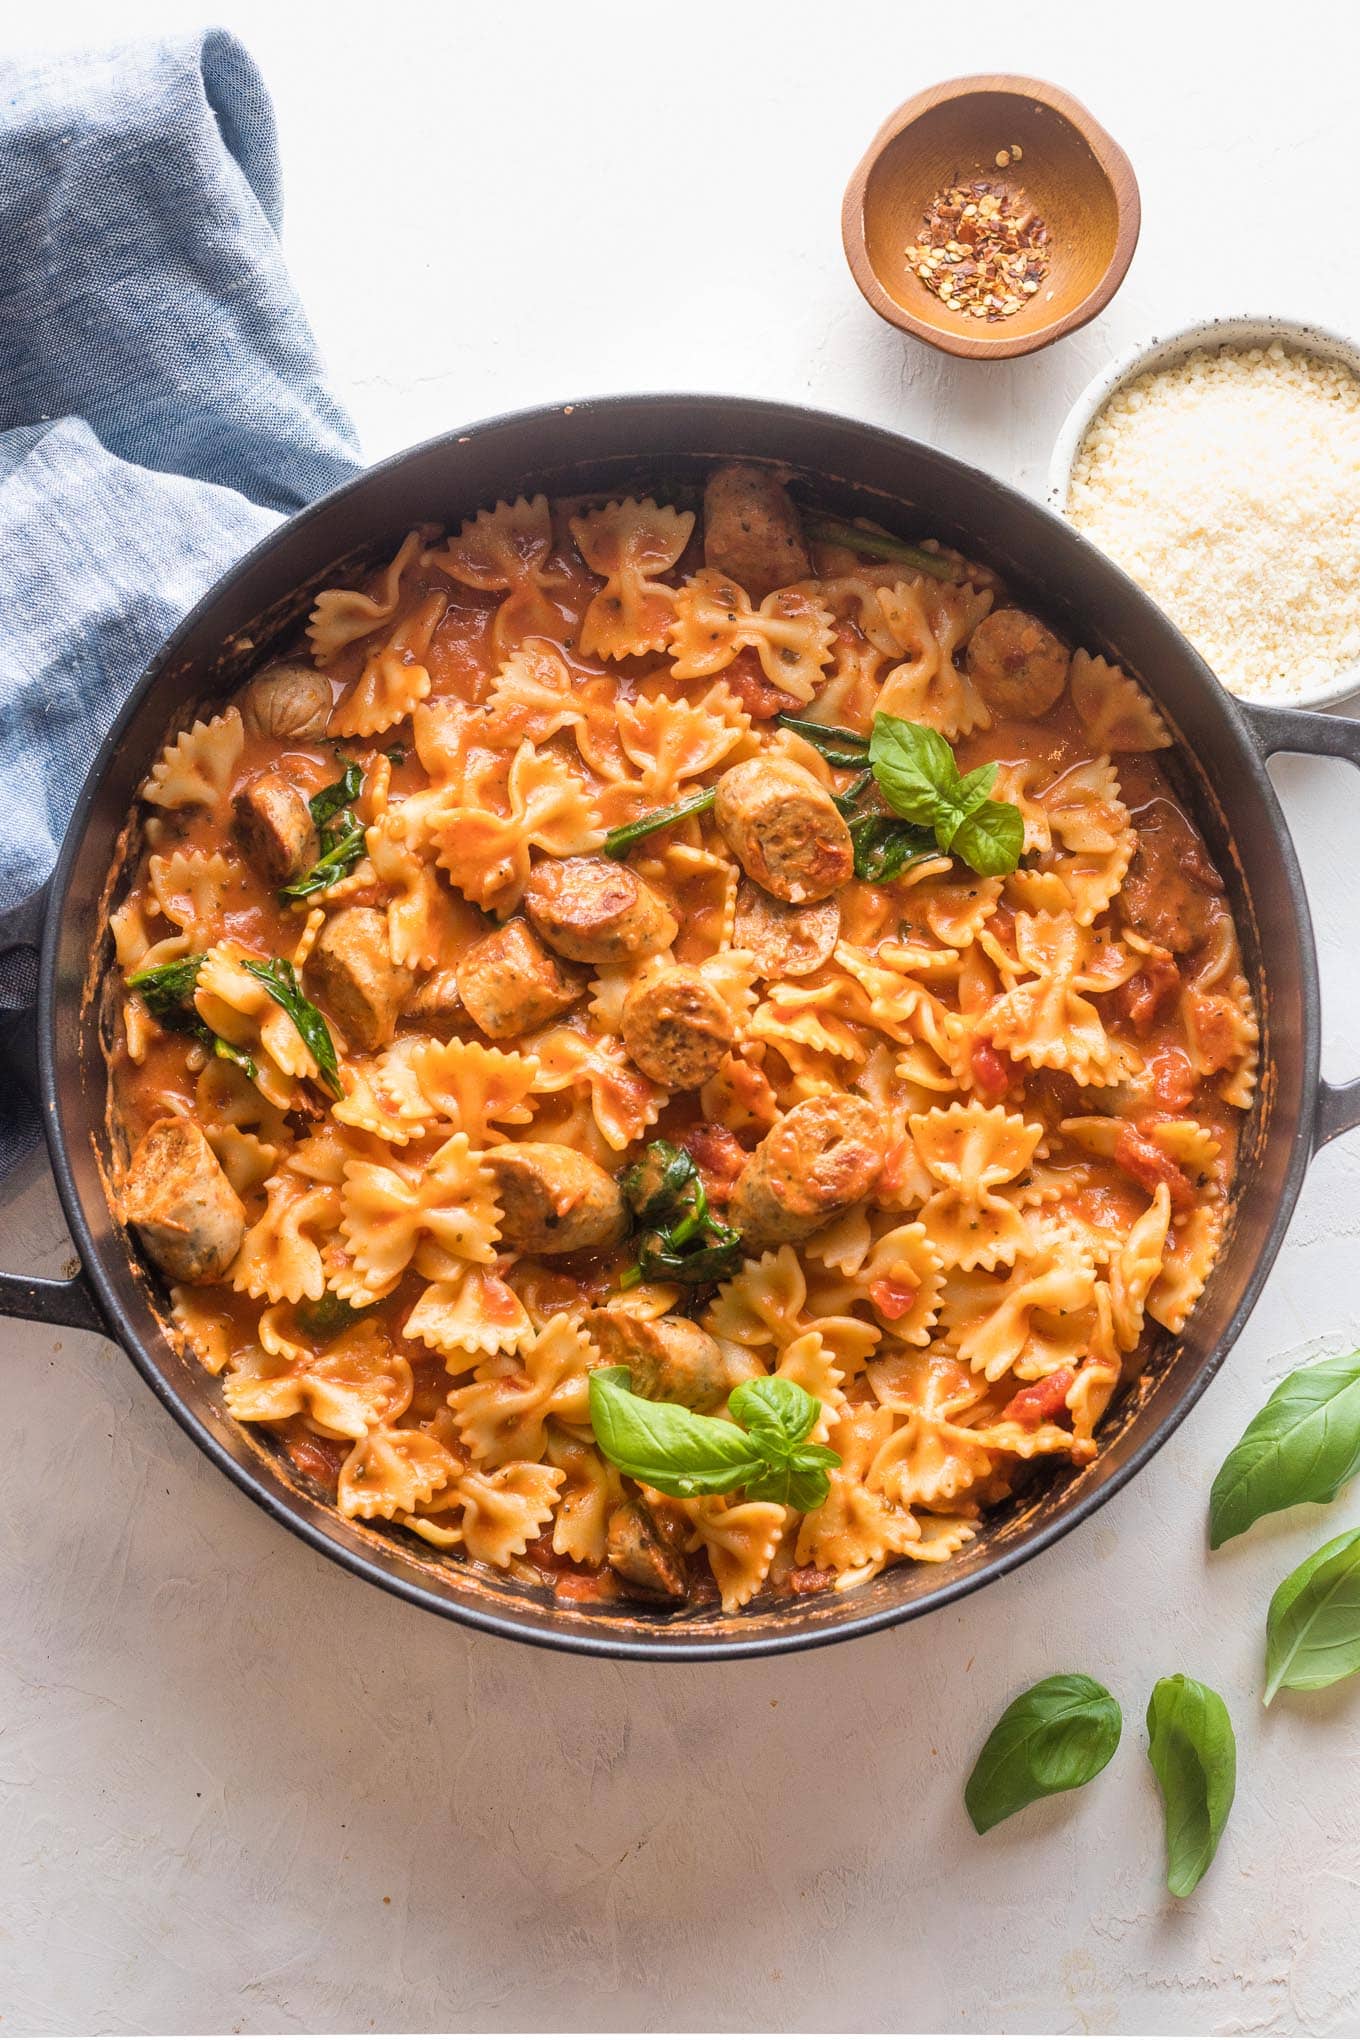 Scene with pasta and marinara sauce and Italian style chicken sausage, ready to serve from a large cast iron pan.